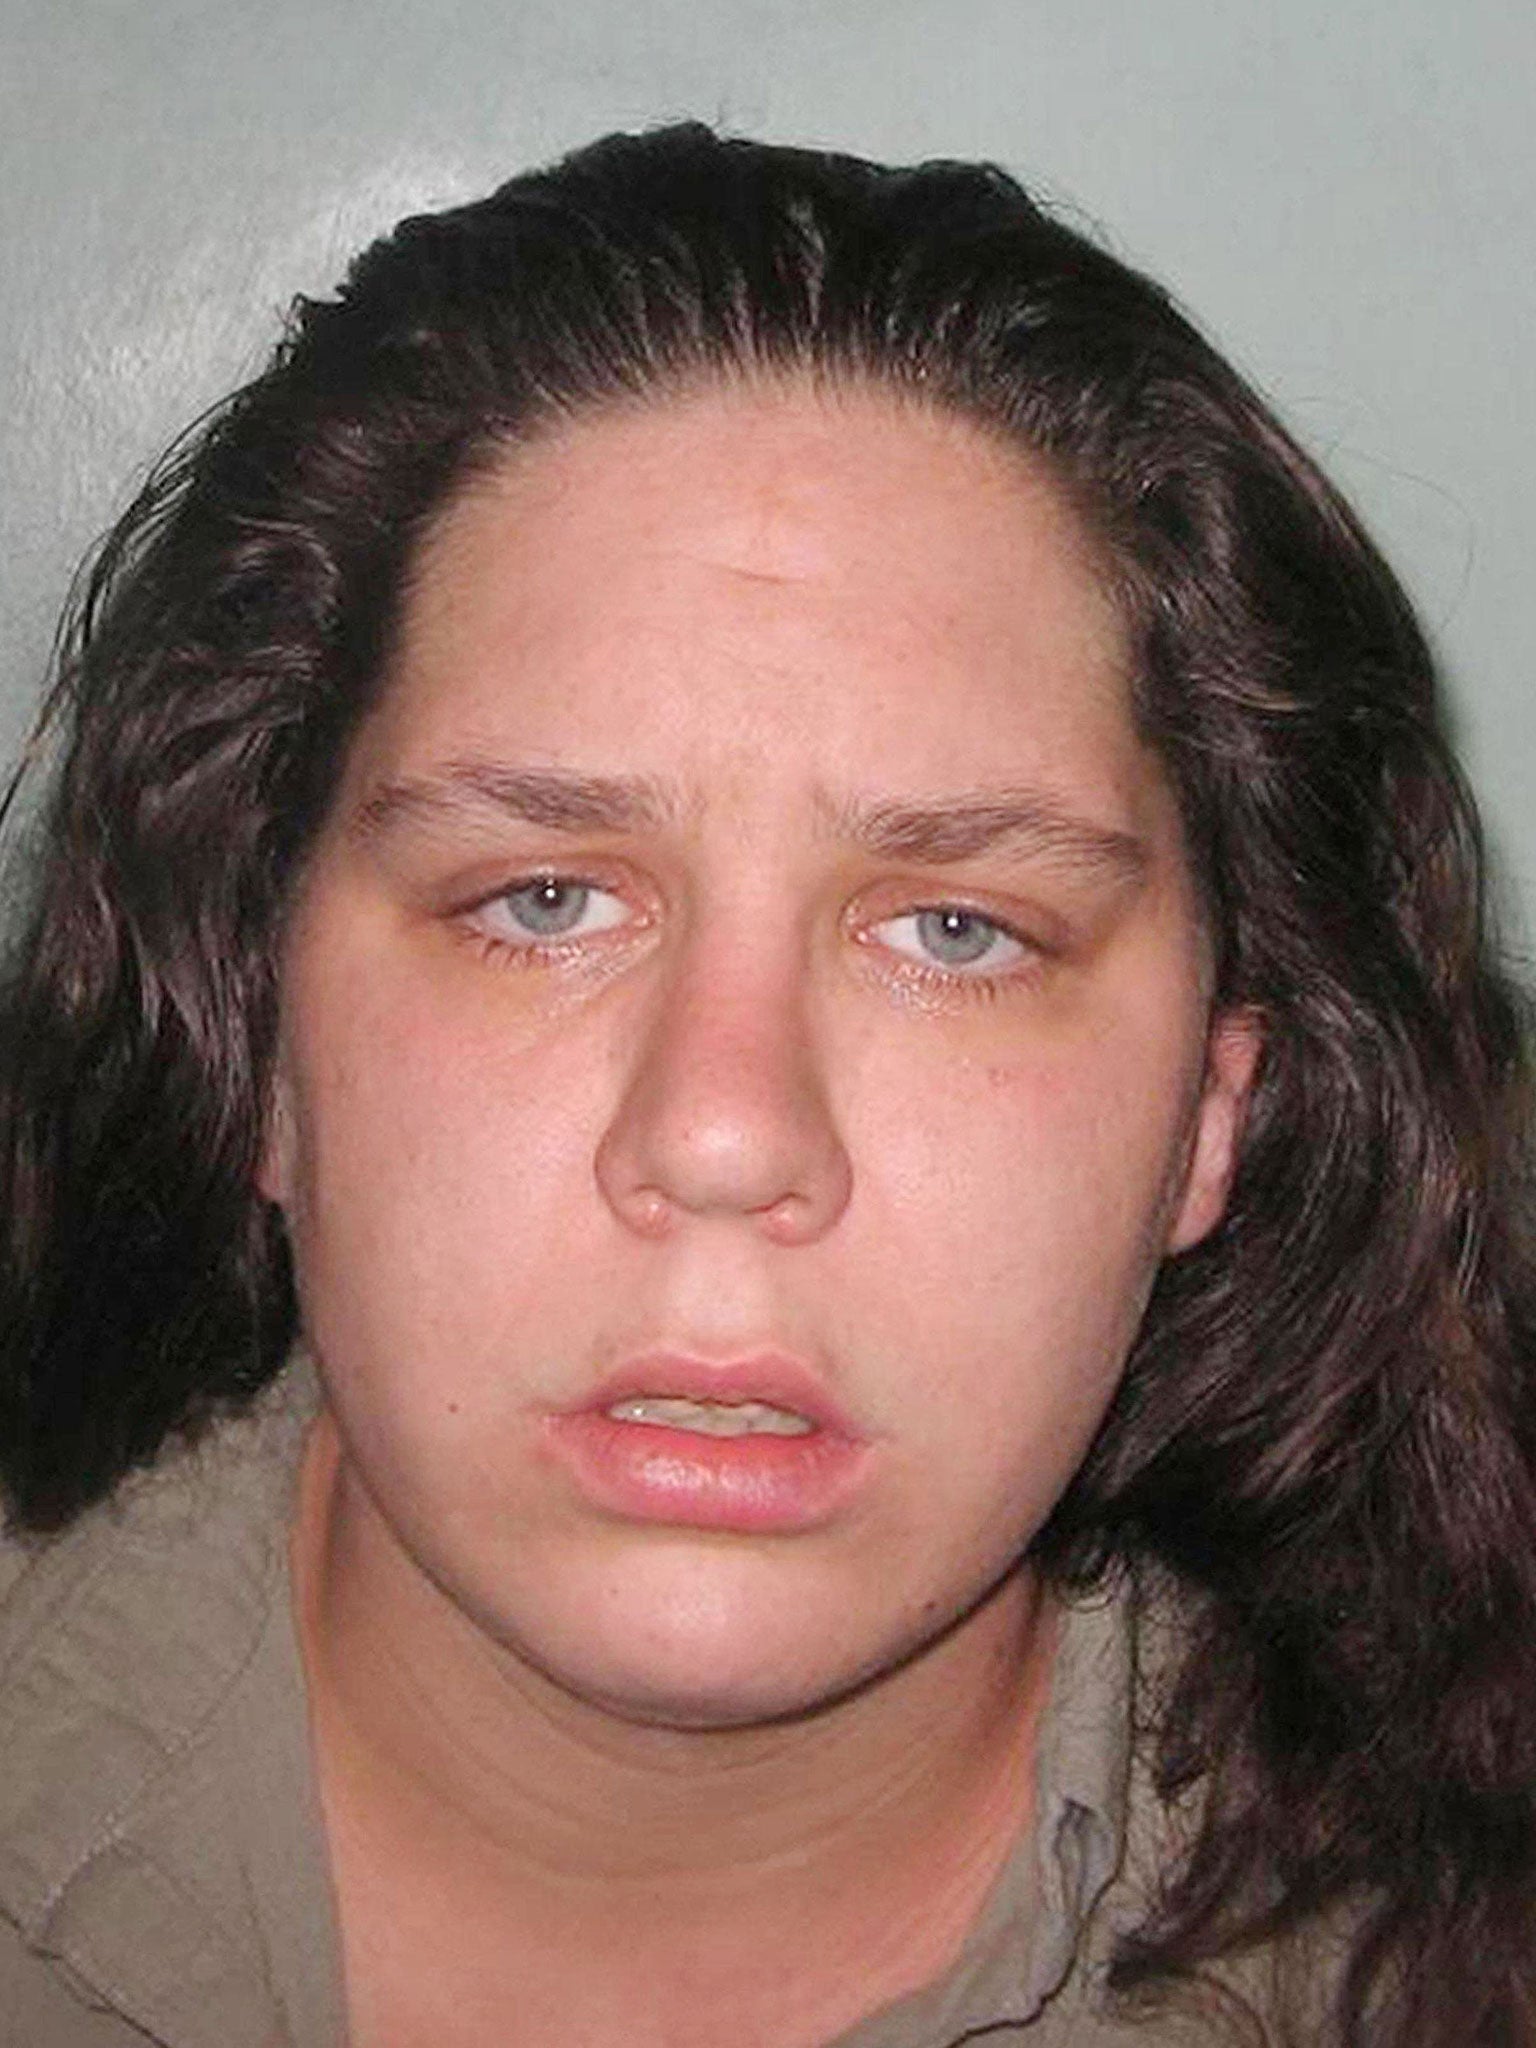 Tracey Connelly was jailed indefinitely with a minimum of five years in May 2009